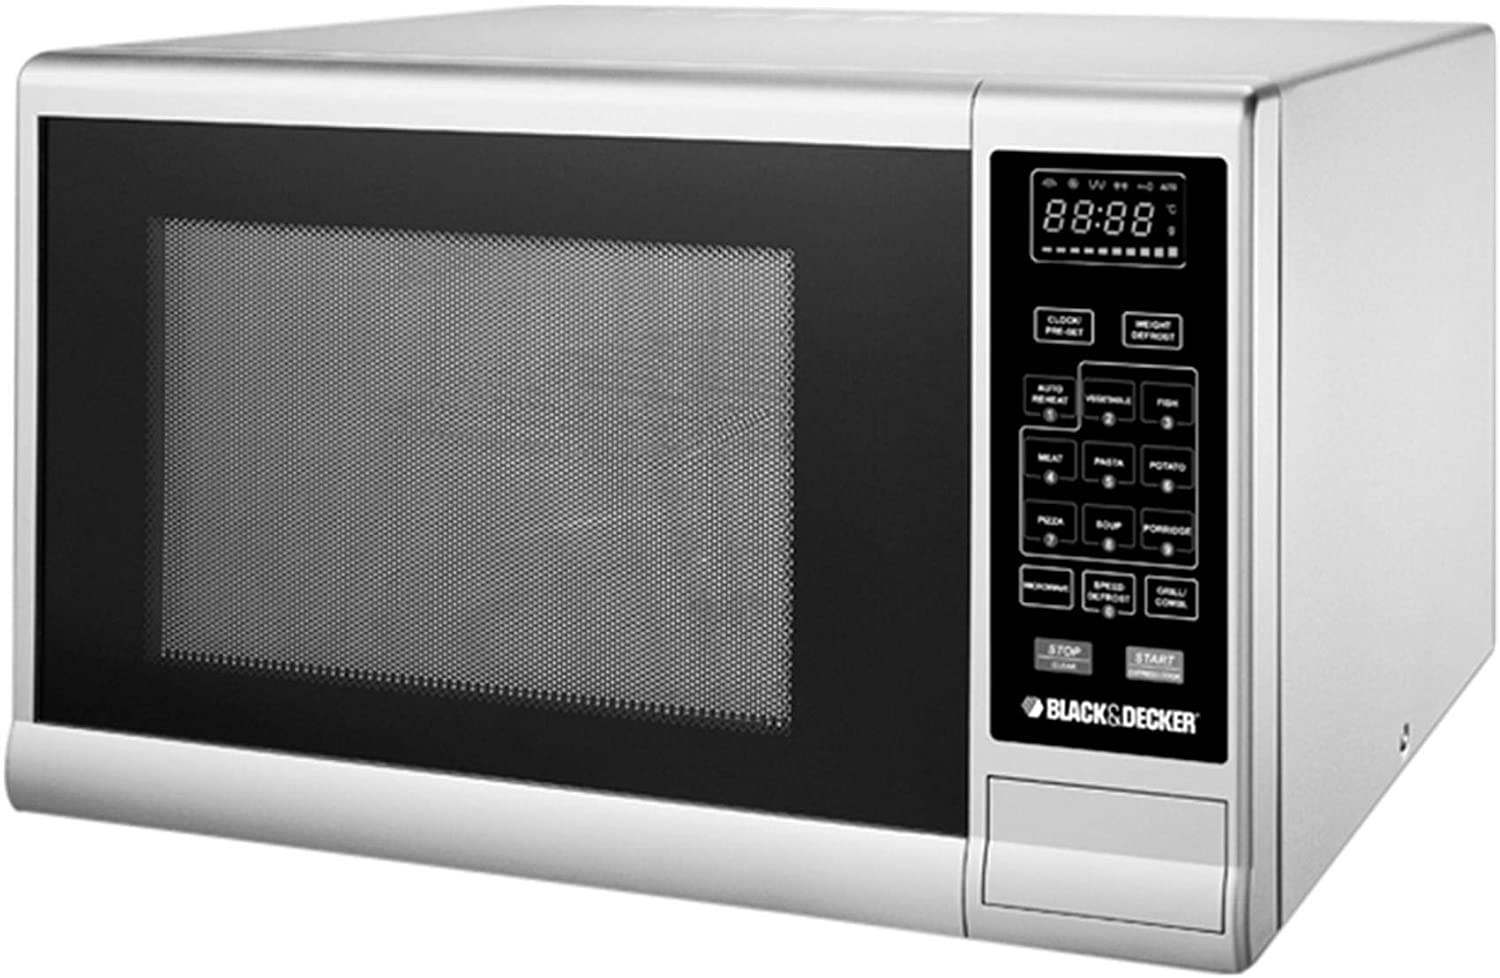 Black & Decker MZ3000PG-B5 30L Microwave Oven with Grill Silver